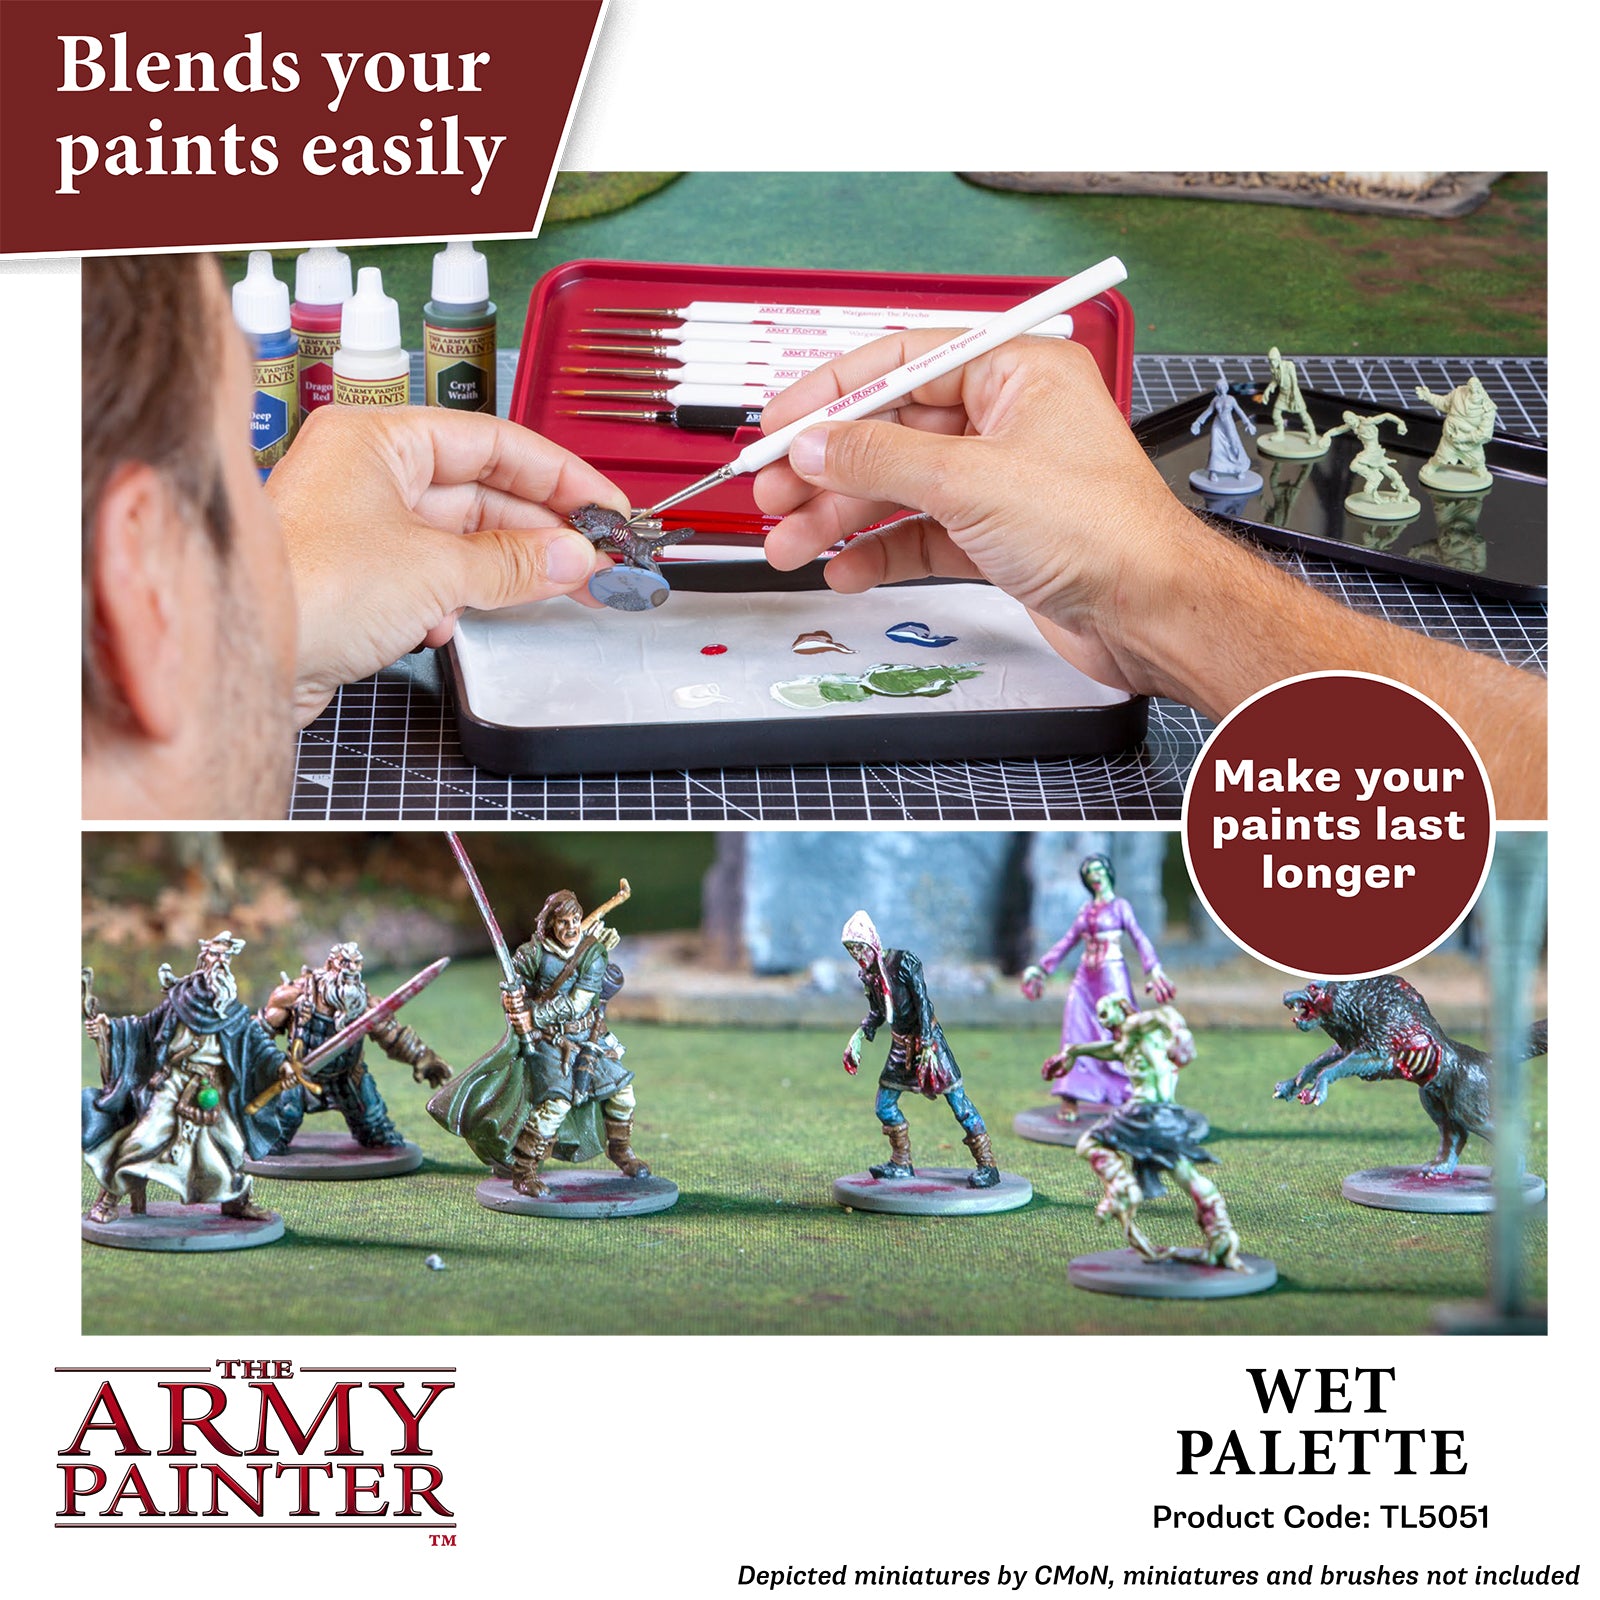 Army Painter Tools - Wet Palette - Wargamer Edition [::] Let's Play Games NZ